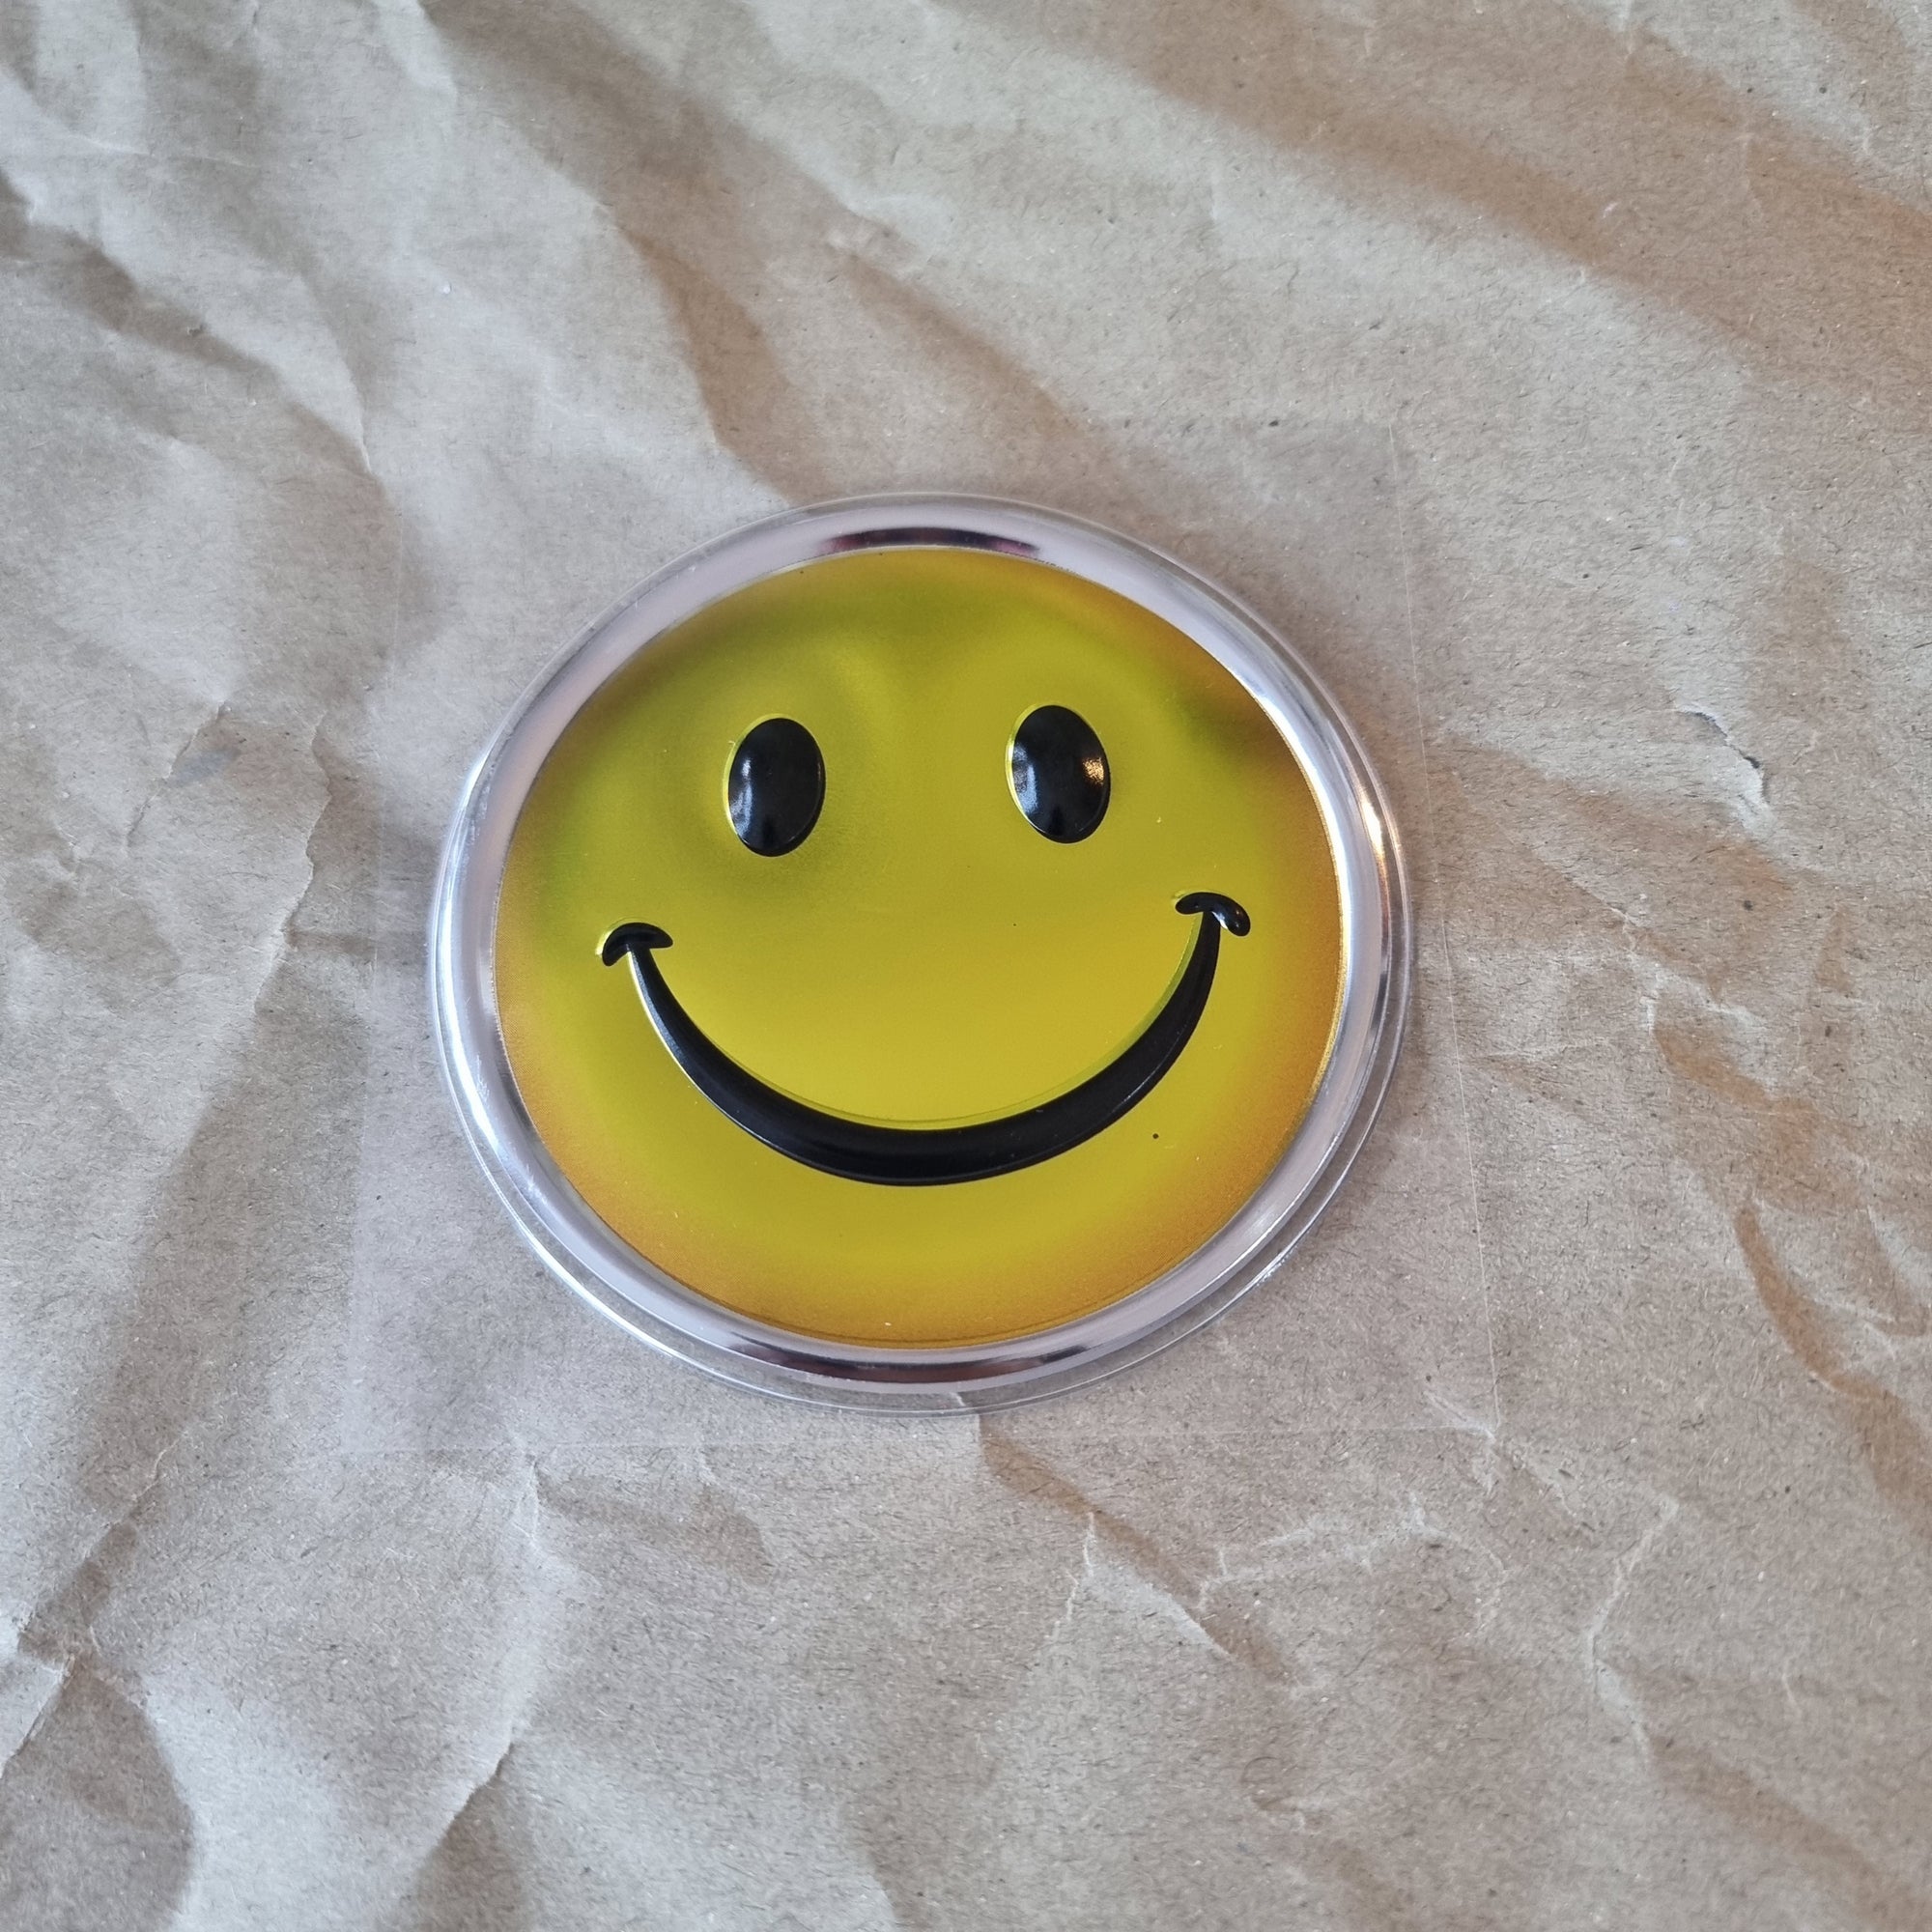 Large smiley face sticker